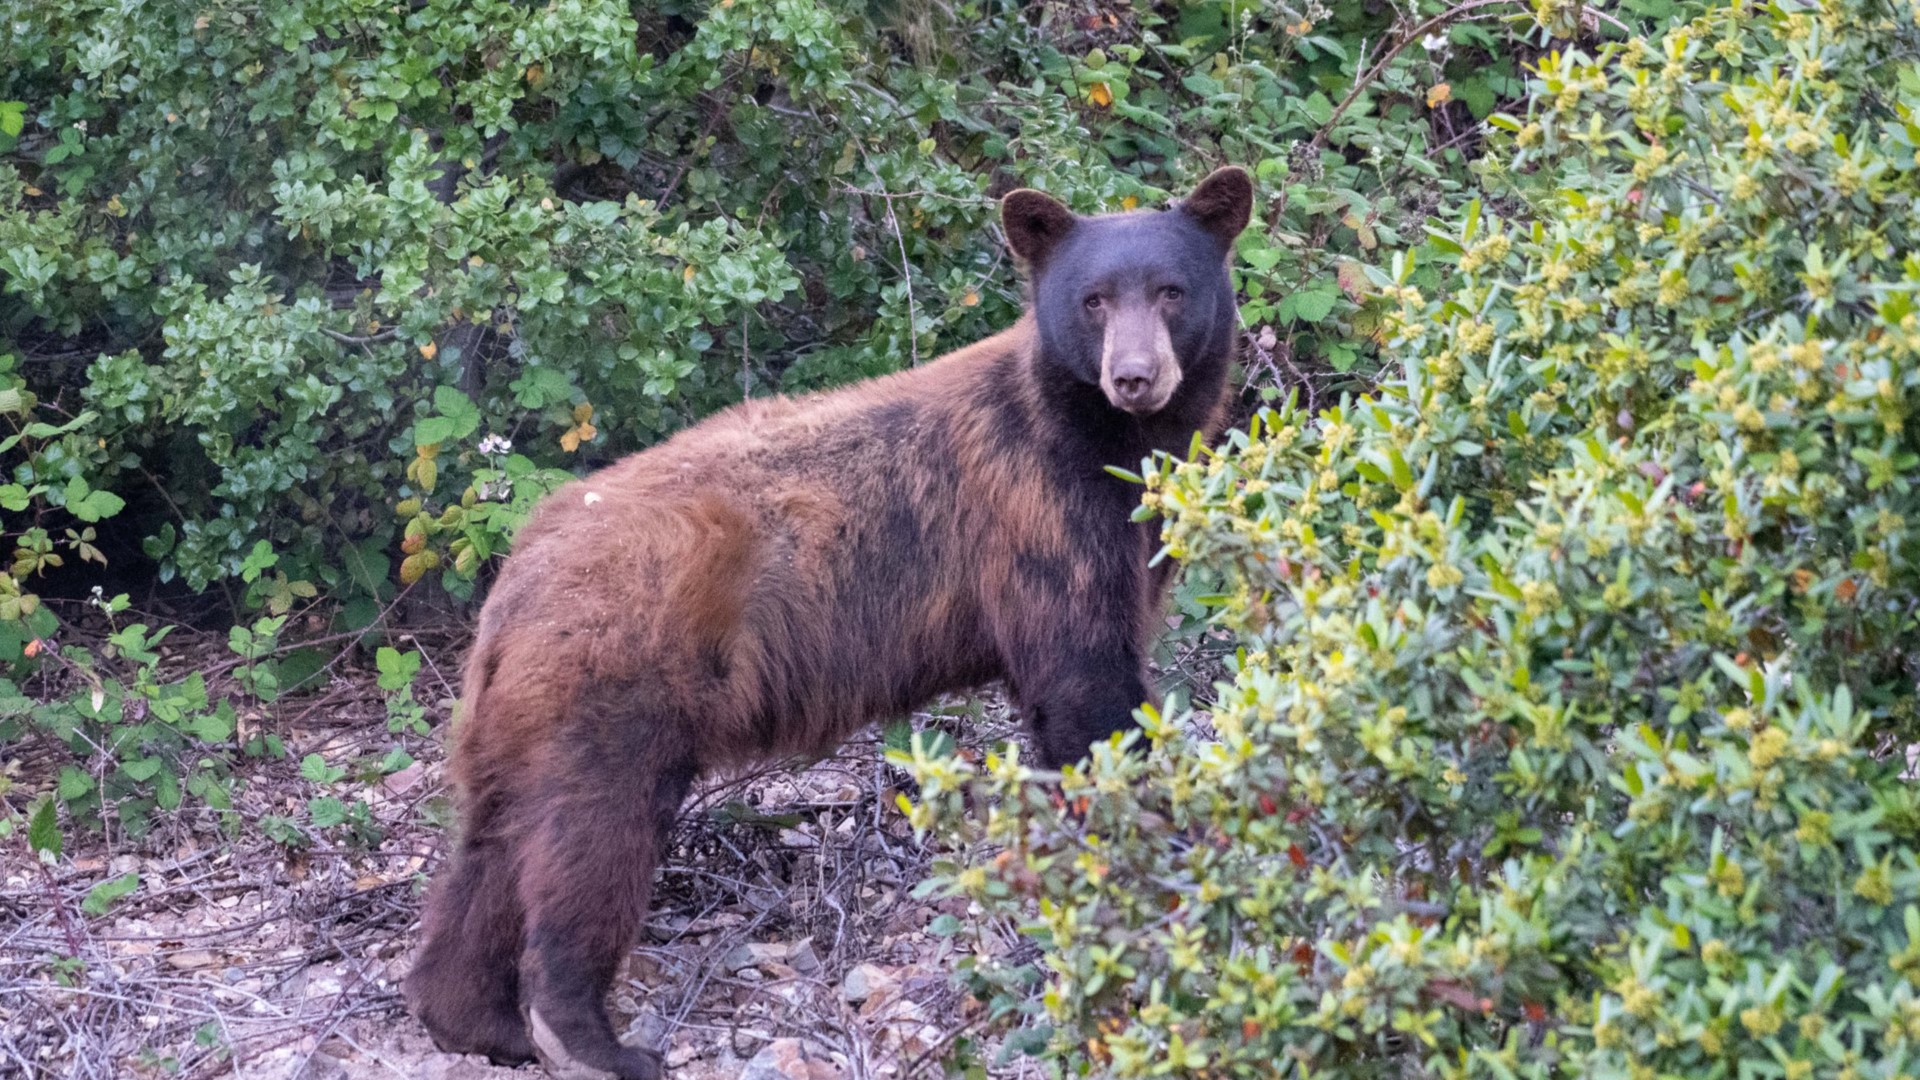 Authorities are warning people in the area of Woodcreek Park in Fairfield to be cautious after bear sightings were reported in the area.